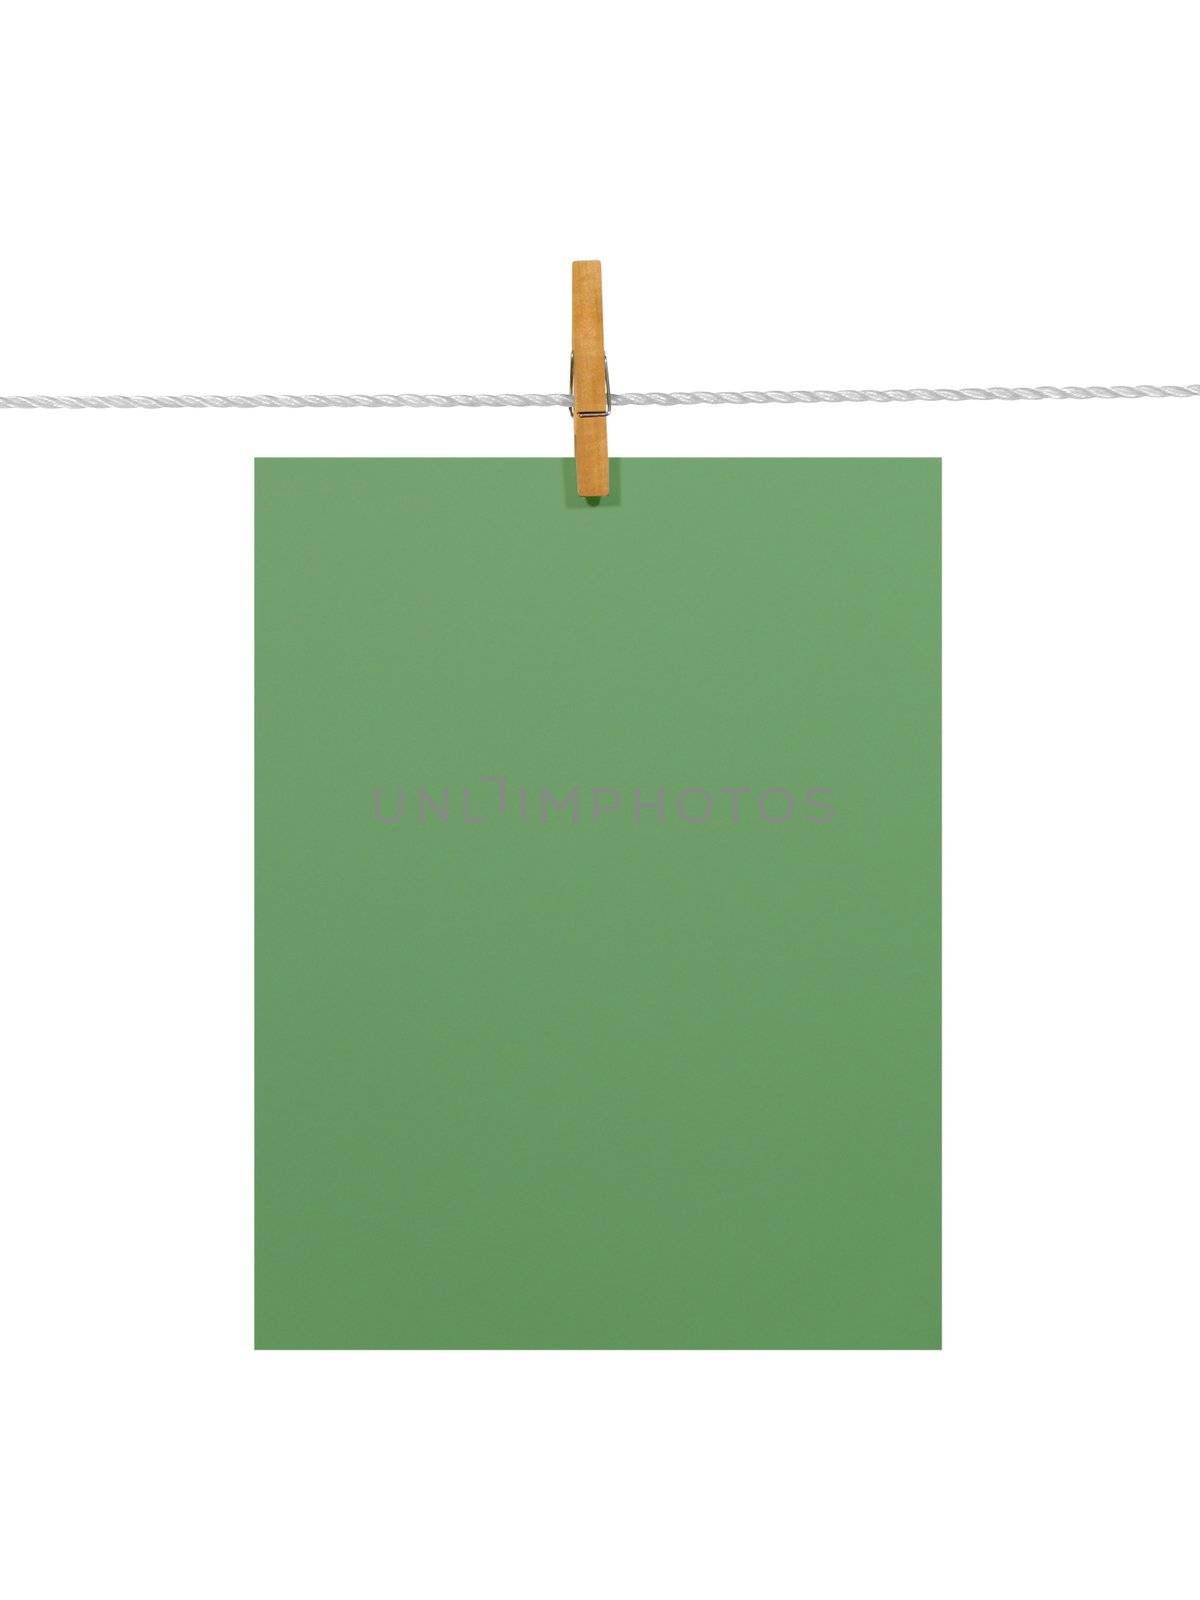 Green blank paper sheet on a clothes line. Isolated on white background. Contains two clipping paths: 1) paper, clothes line and clothespin; 2) paper only